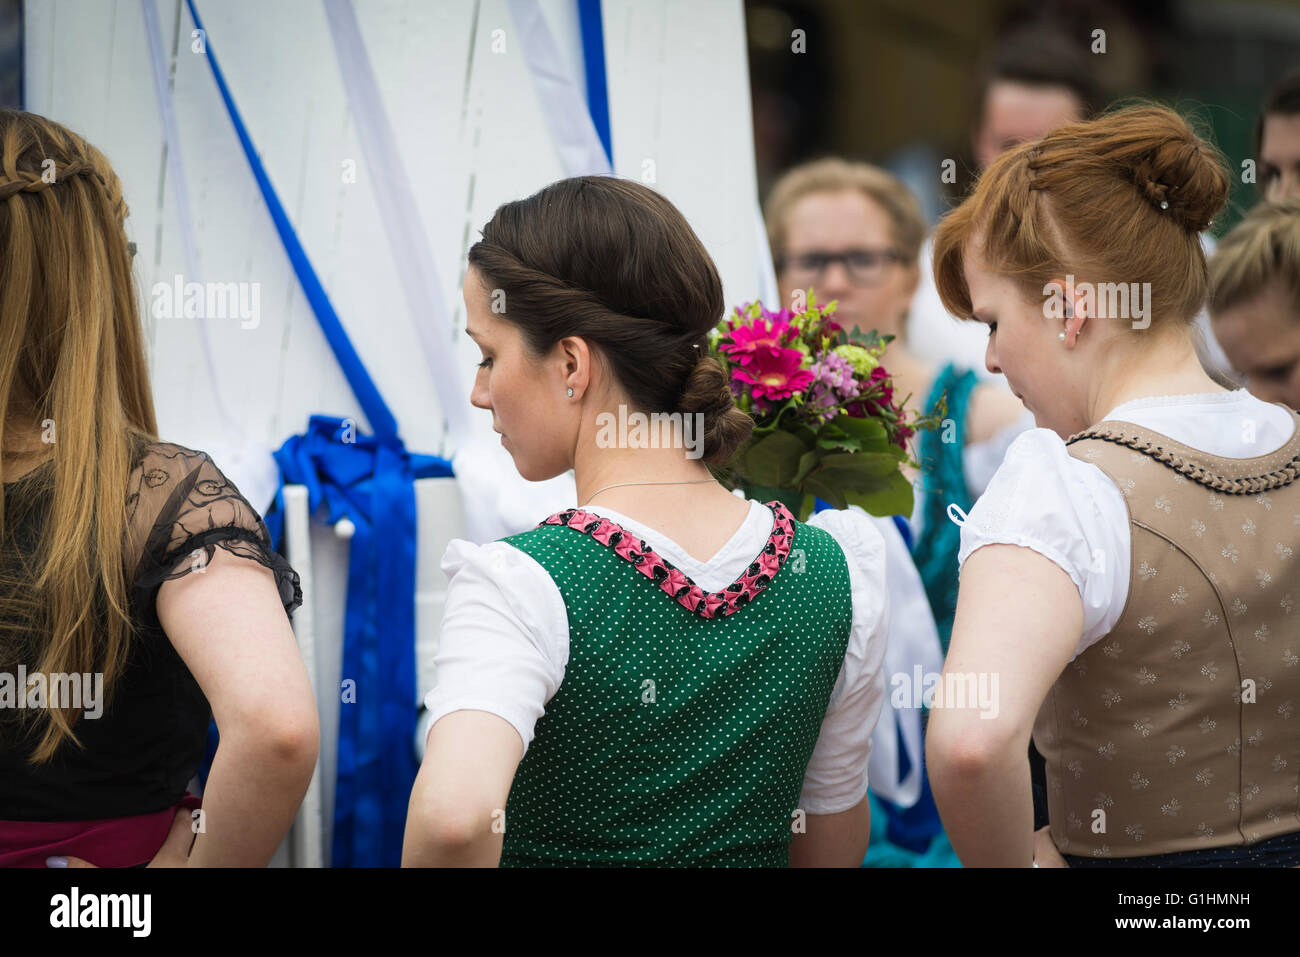 Women in local dresses pause for a moment while dancing a traditional Bavarian folk dance around a maypole,Bavaria,Germany Stock Photo